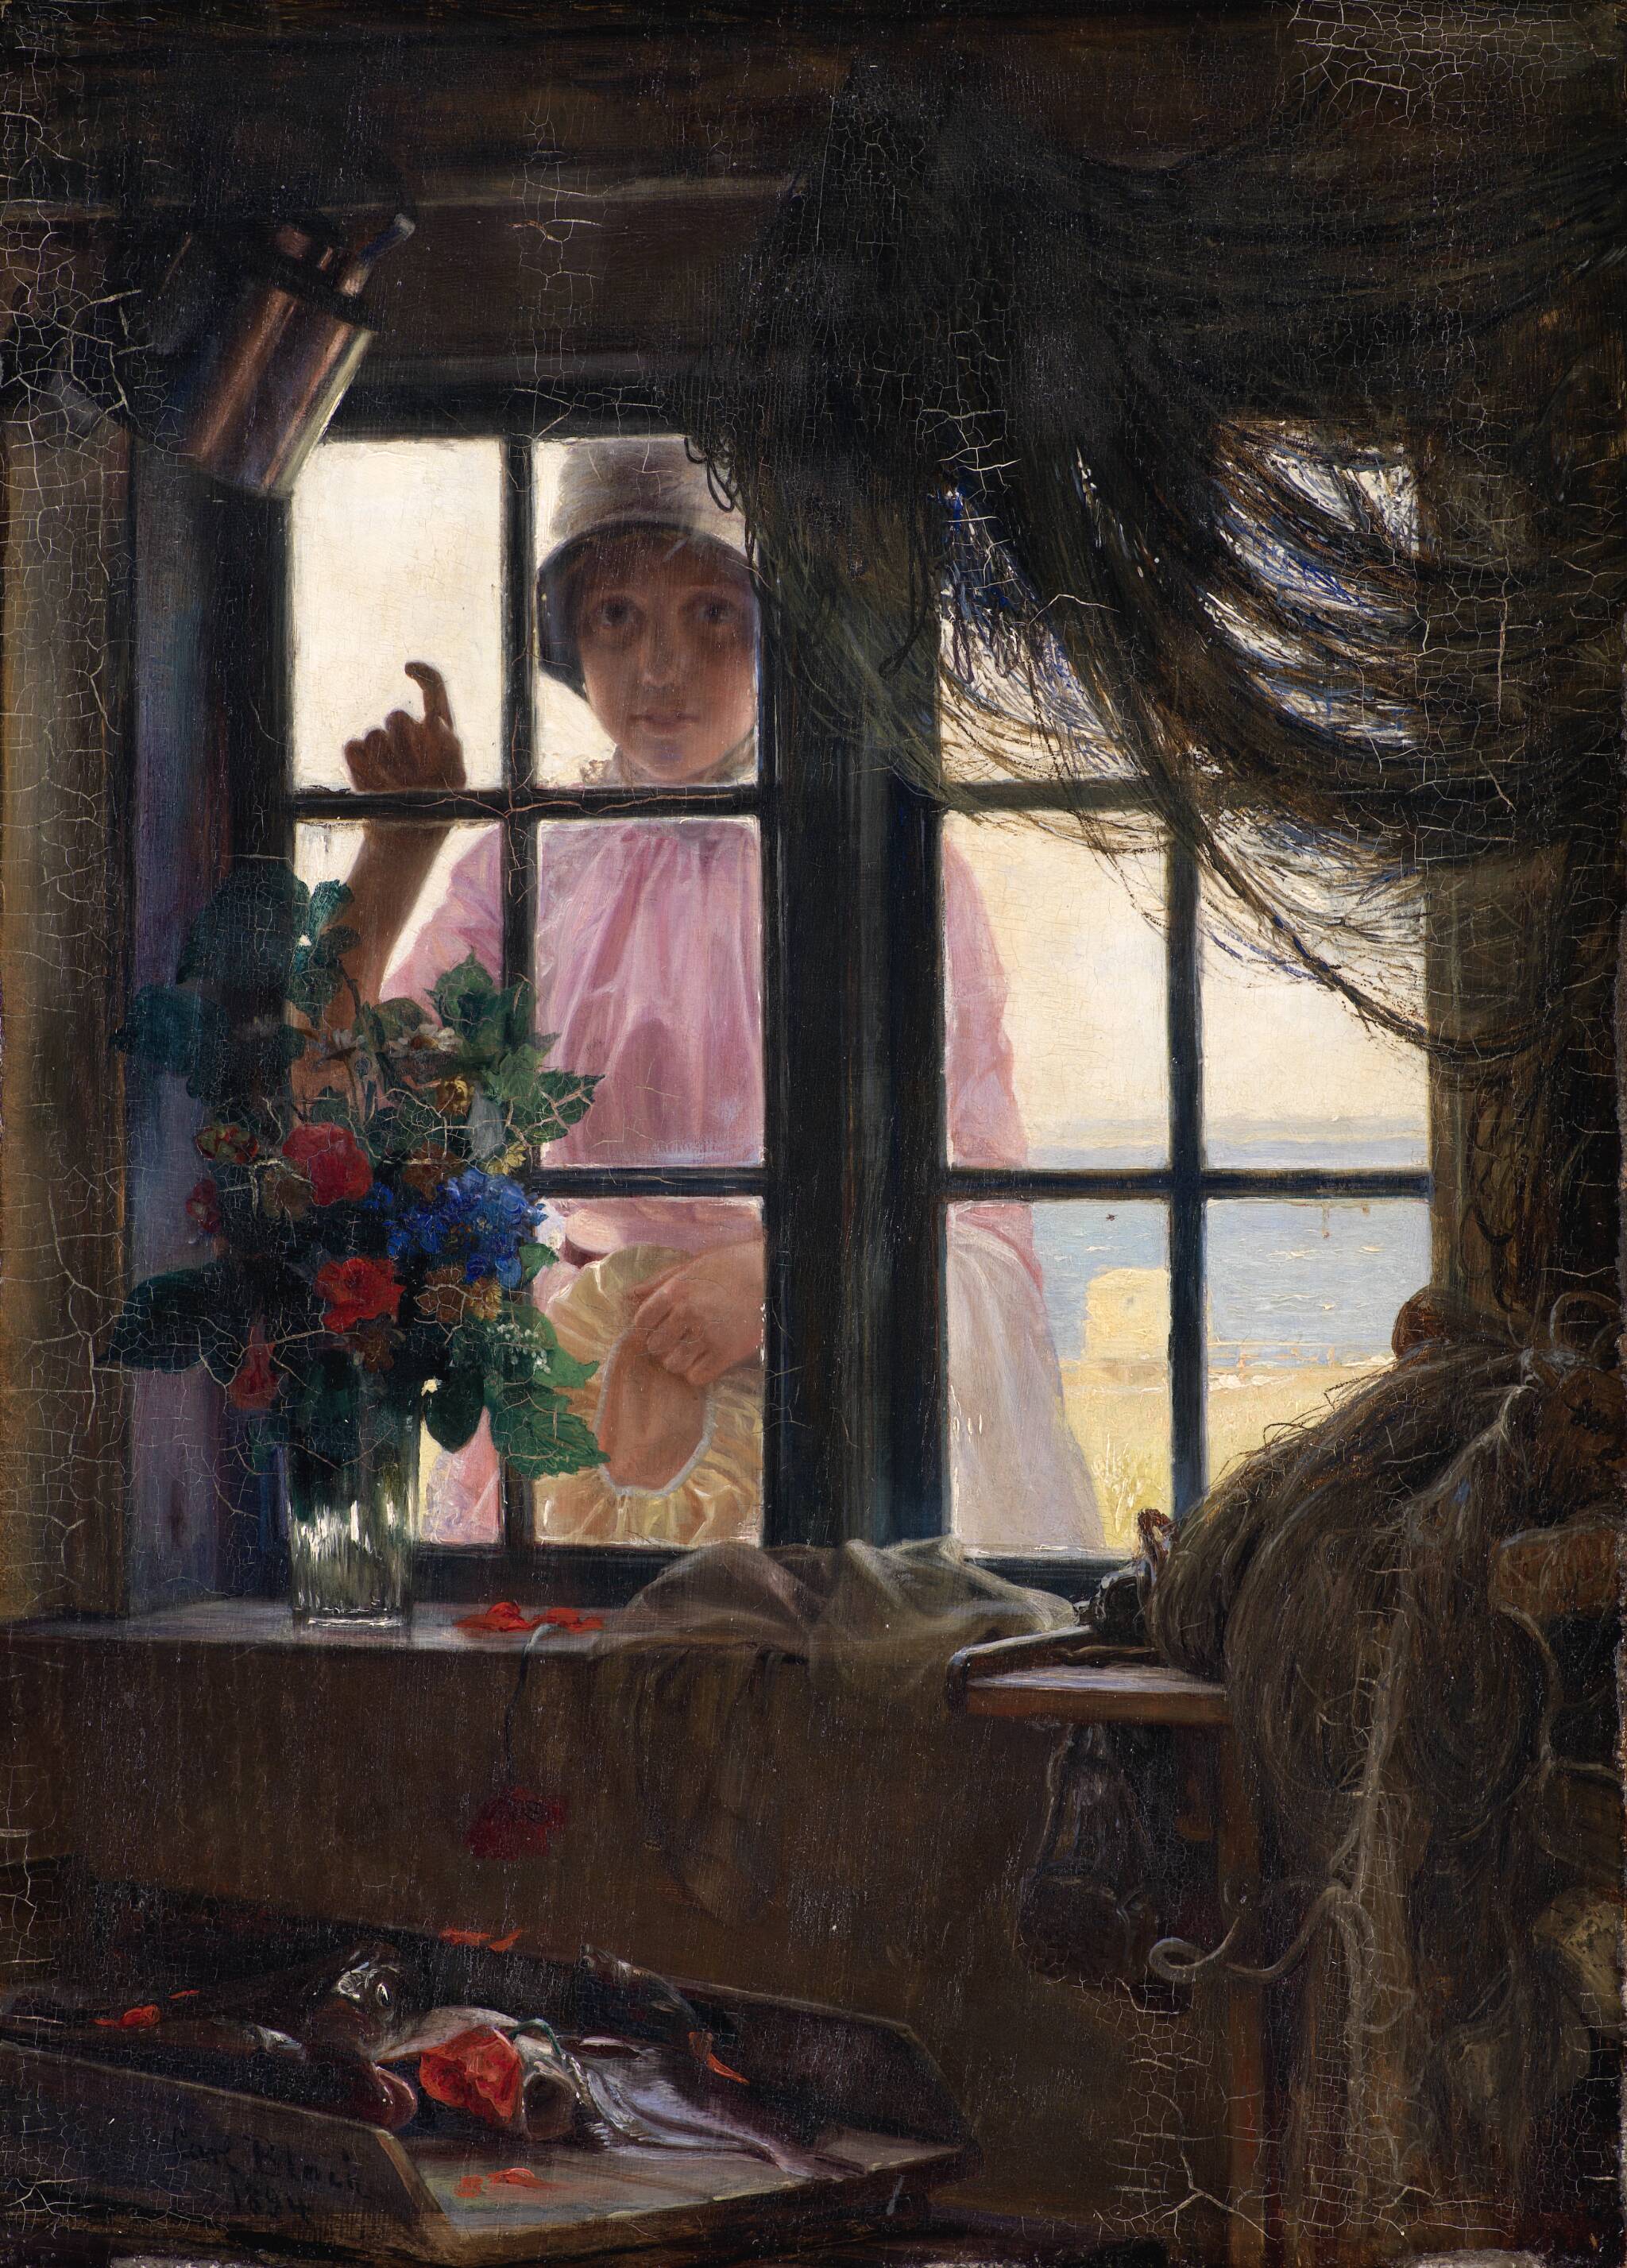 Carl Bloch - After the Bath. A Young Girl Knocking at the Fisherman's Window (1884).jpg